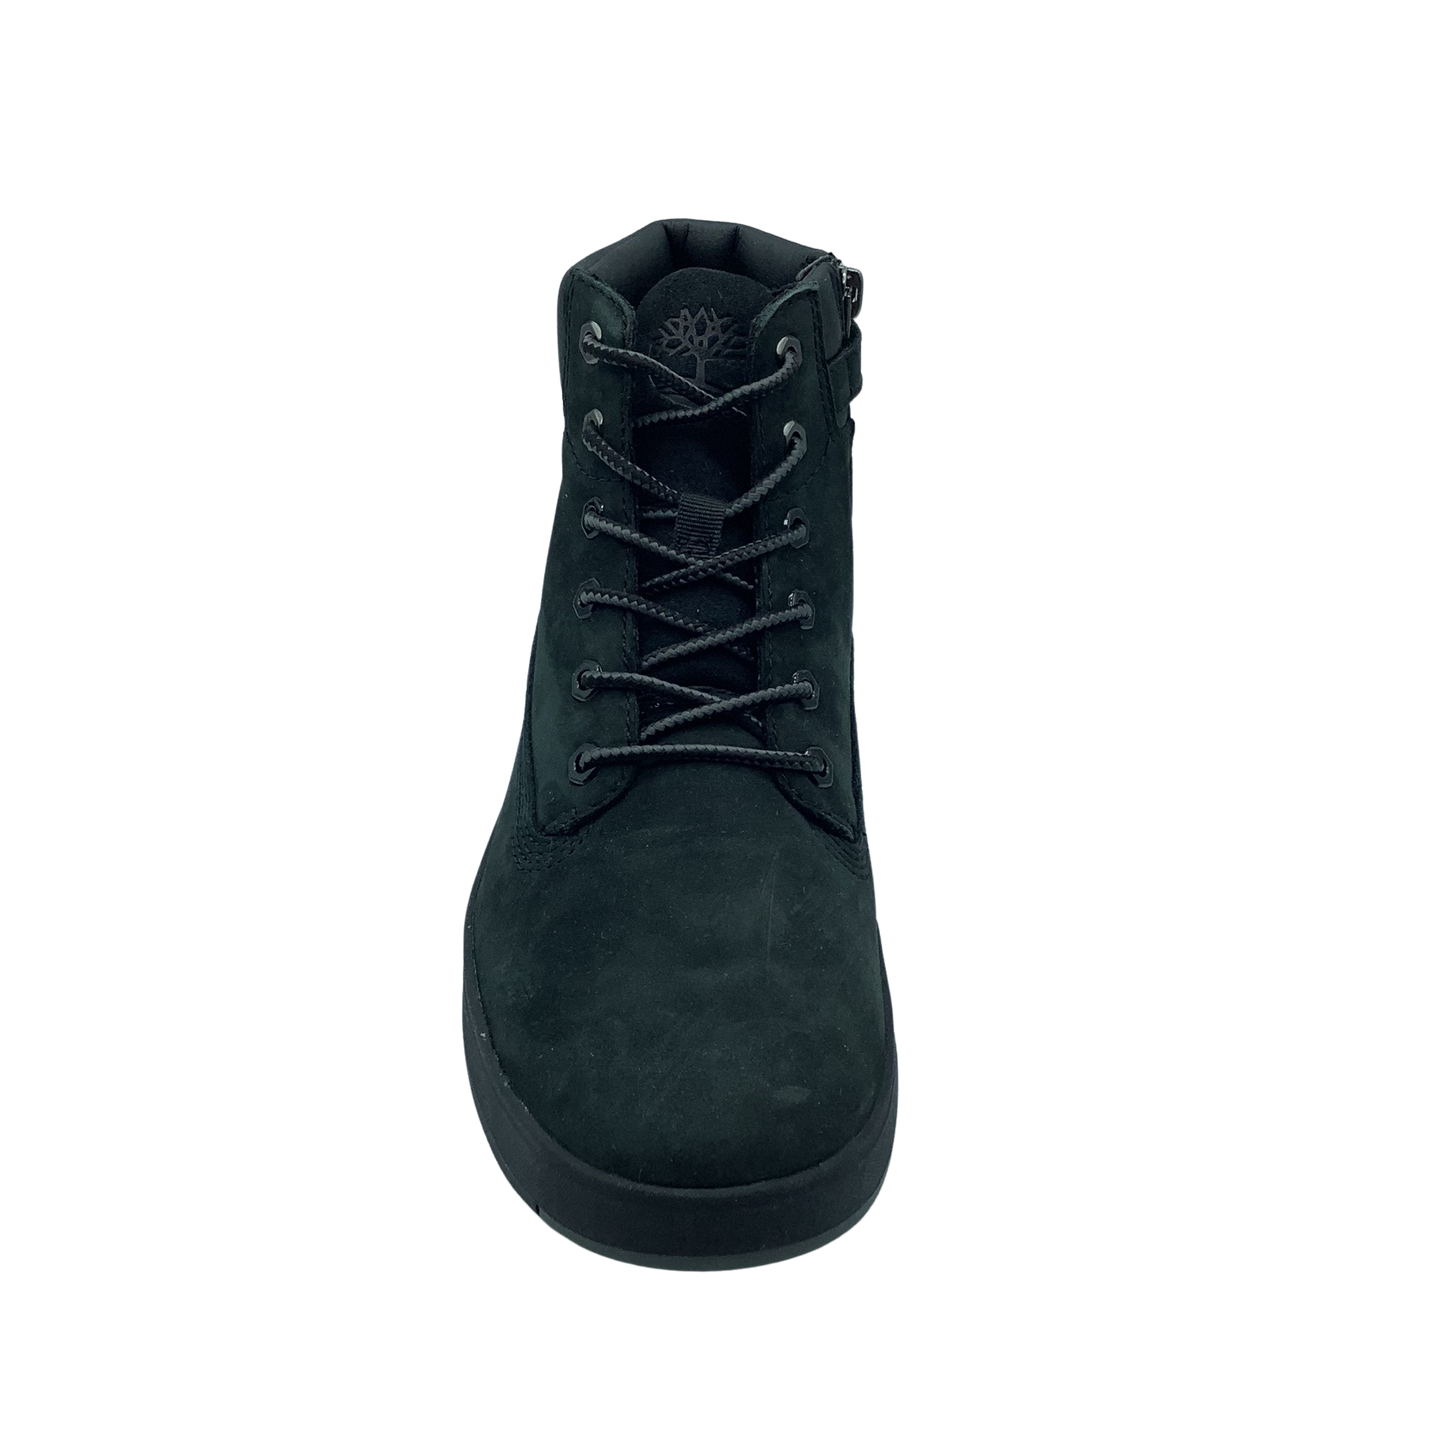 Timberland DAVIS SQUARE 6 IN SIDE ZIP BOOT